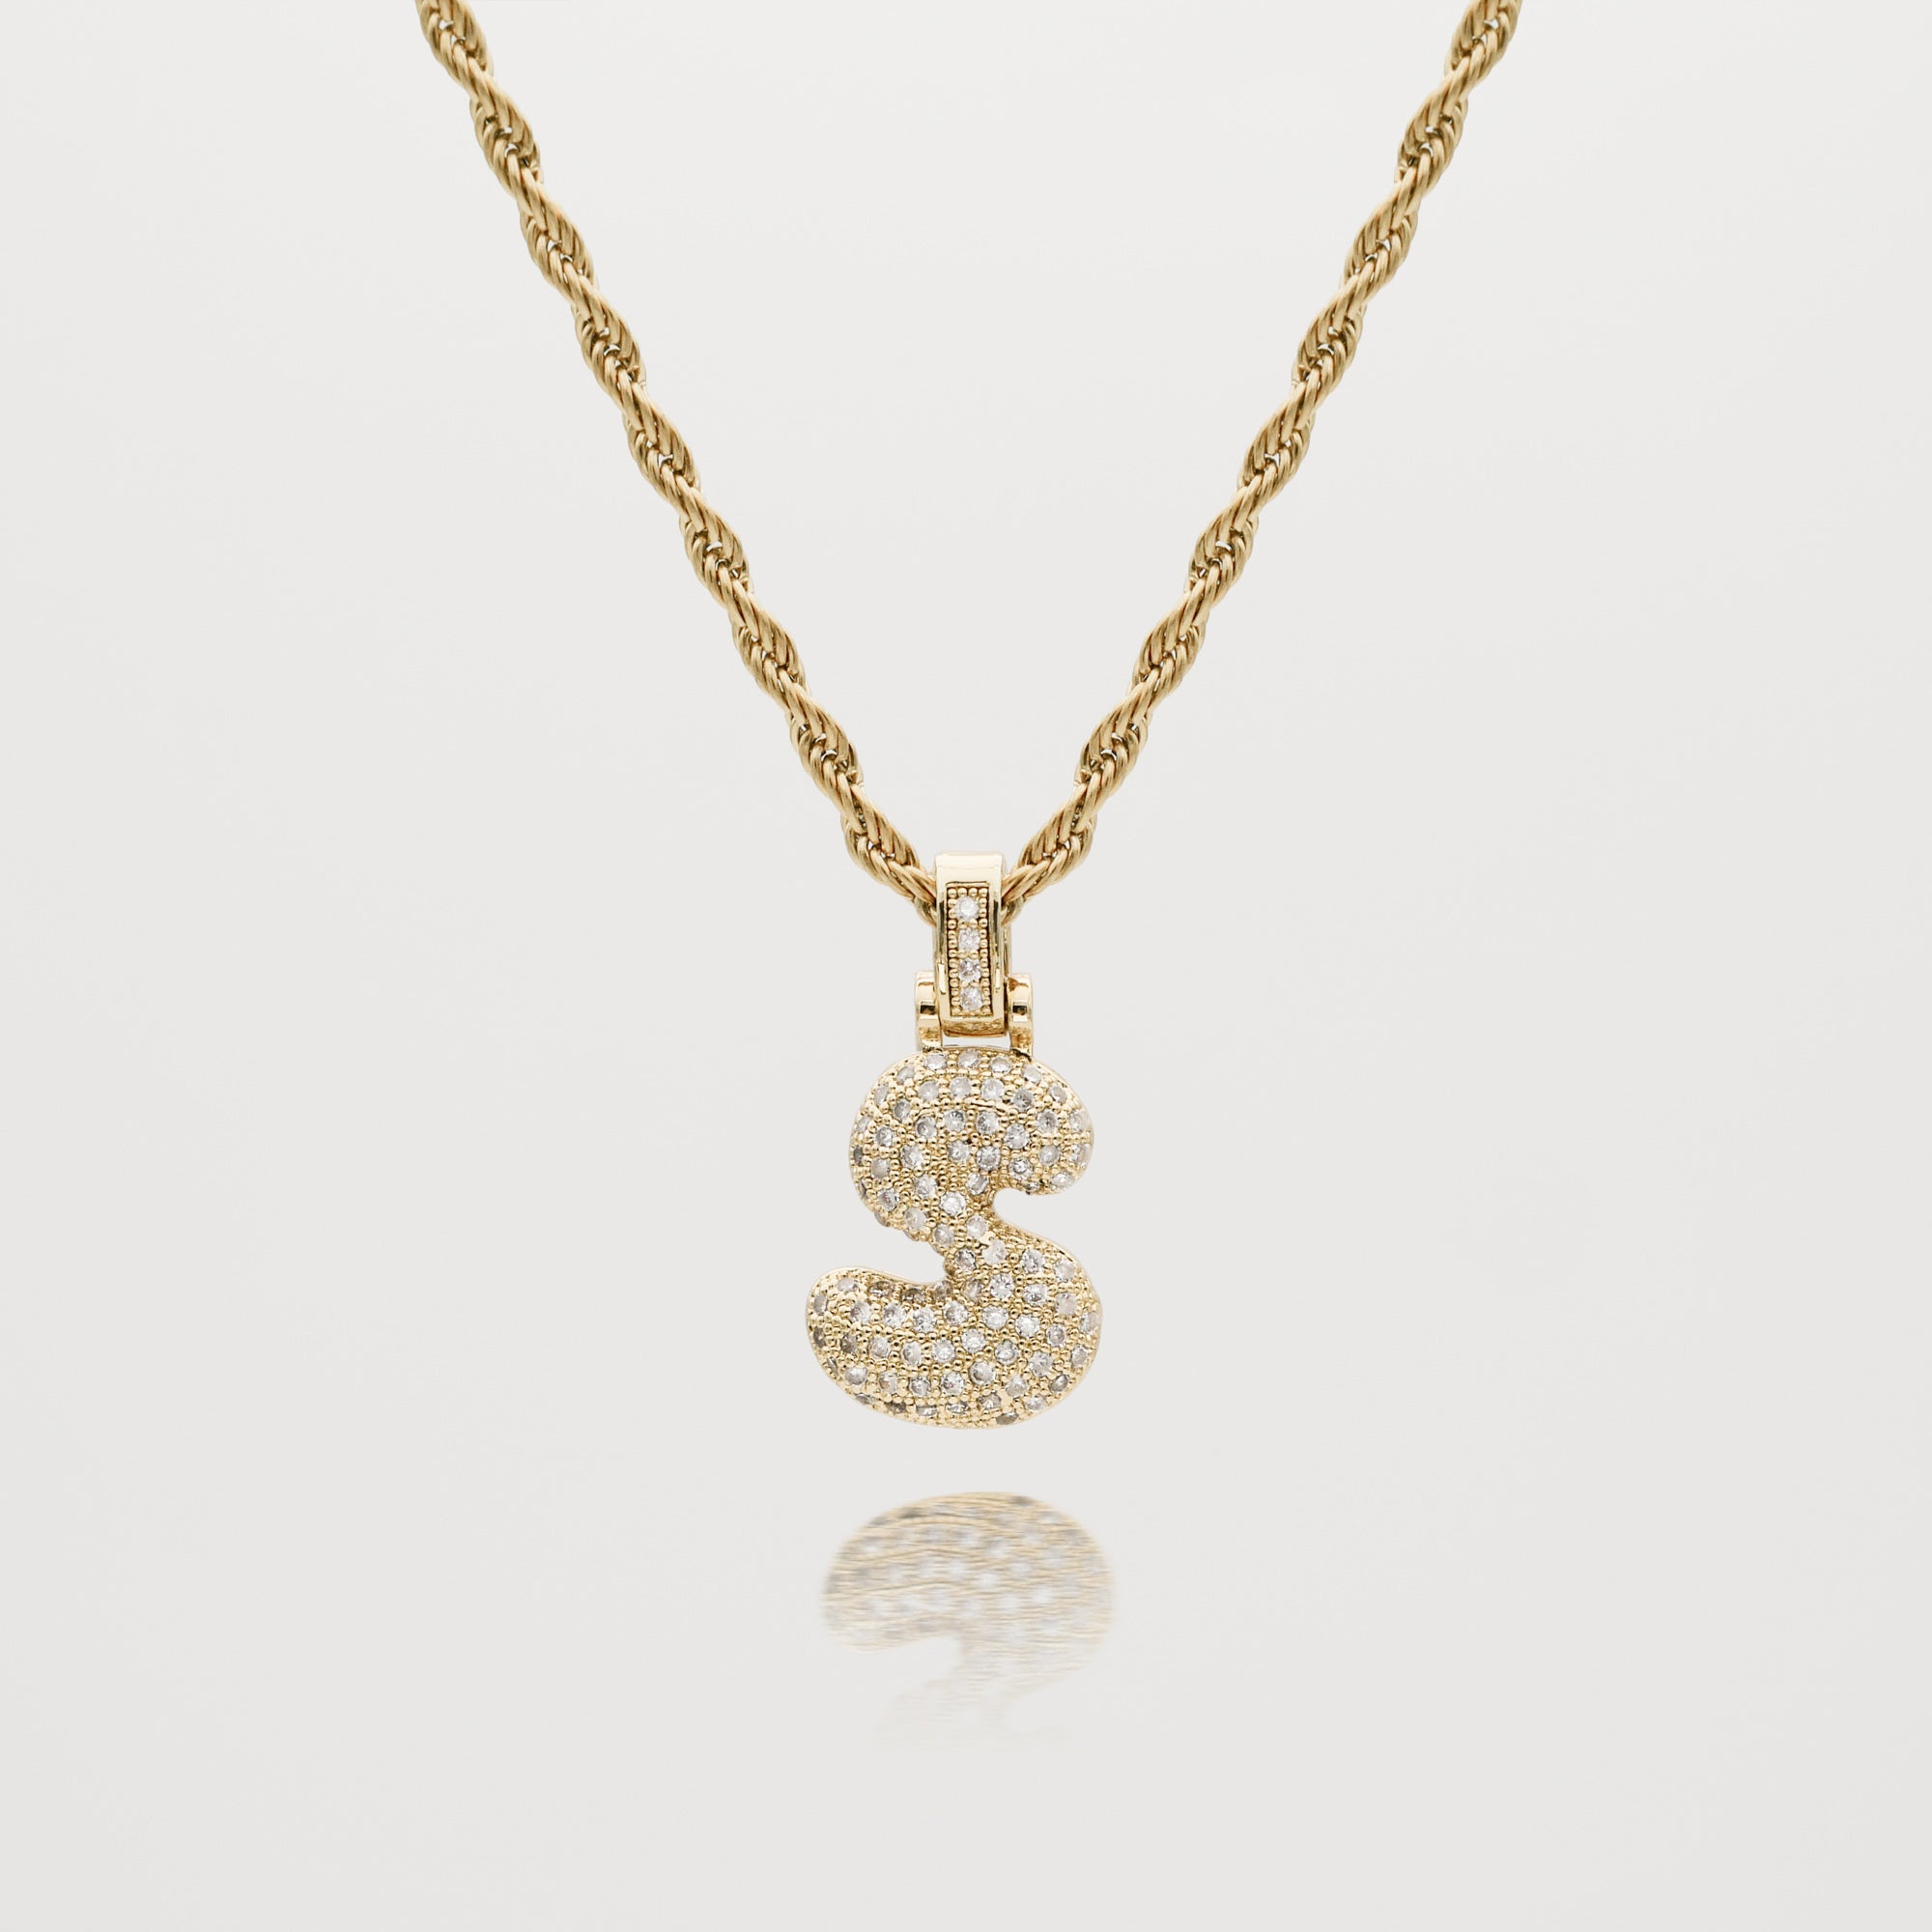 Pave Bubble Letter Initial Necklace encrusted with radiant CZ stones in gold rope chain